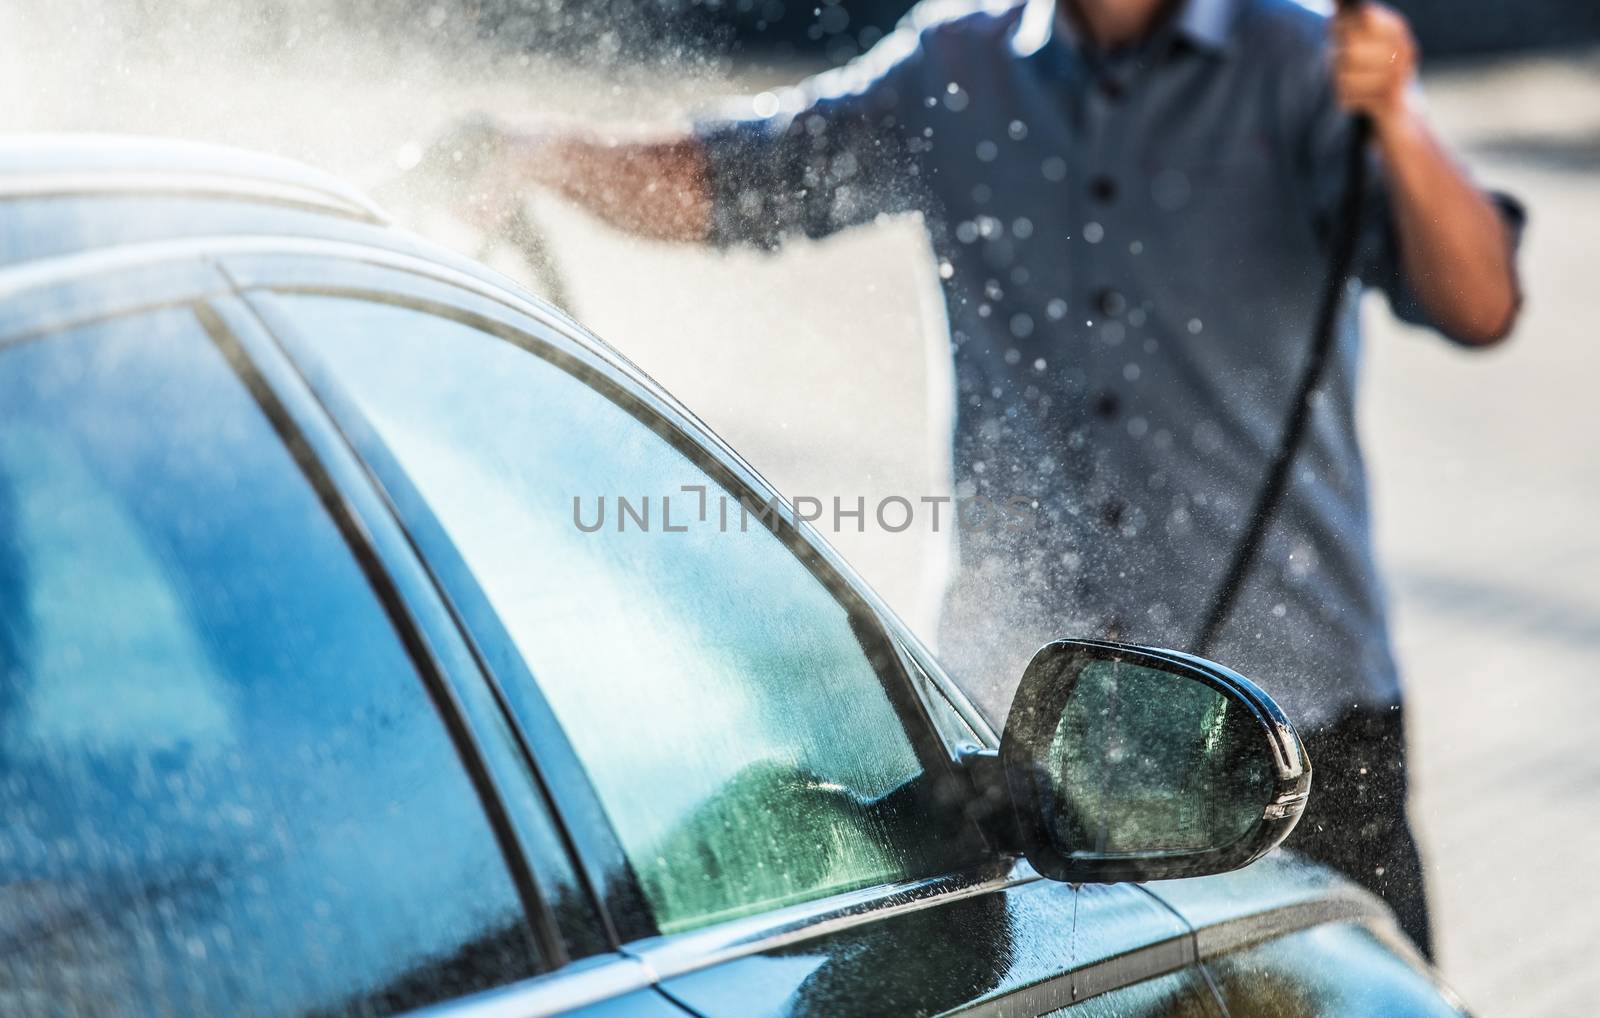 Caucasian Men Cleaning Vehicle in the Car Wash. Closeup Photo. Automotive Theme.